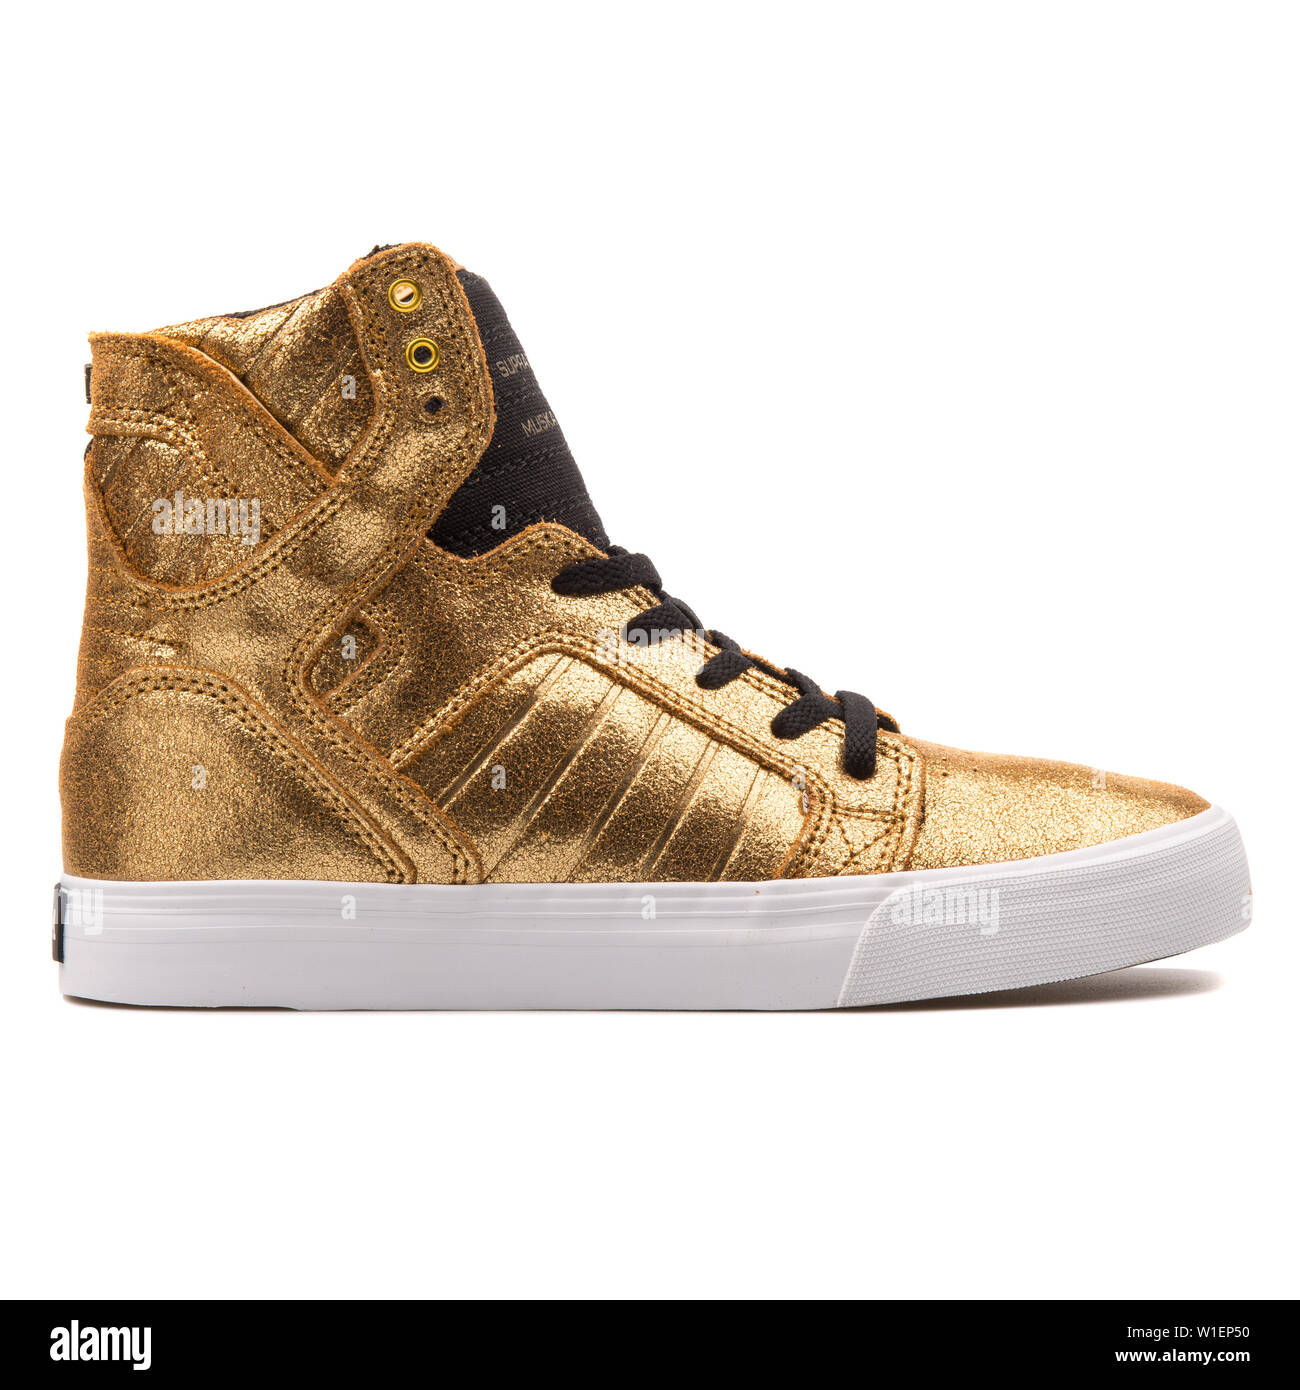 Enzovoorts doen alsof Medicinaal VIENNA, AUSTRIA - AUGUST 10, 2017: Supra Kids Skytop gold sneaker on white  background Stock Photo - Alamy